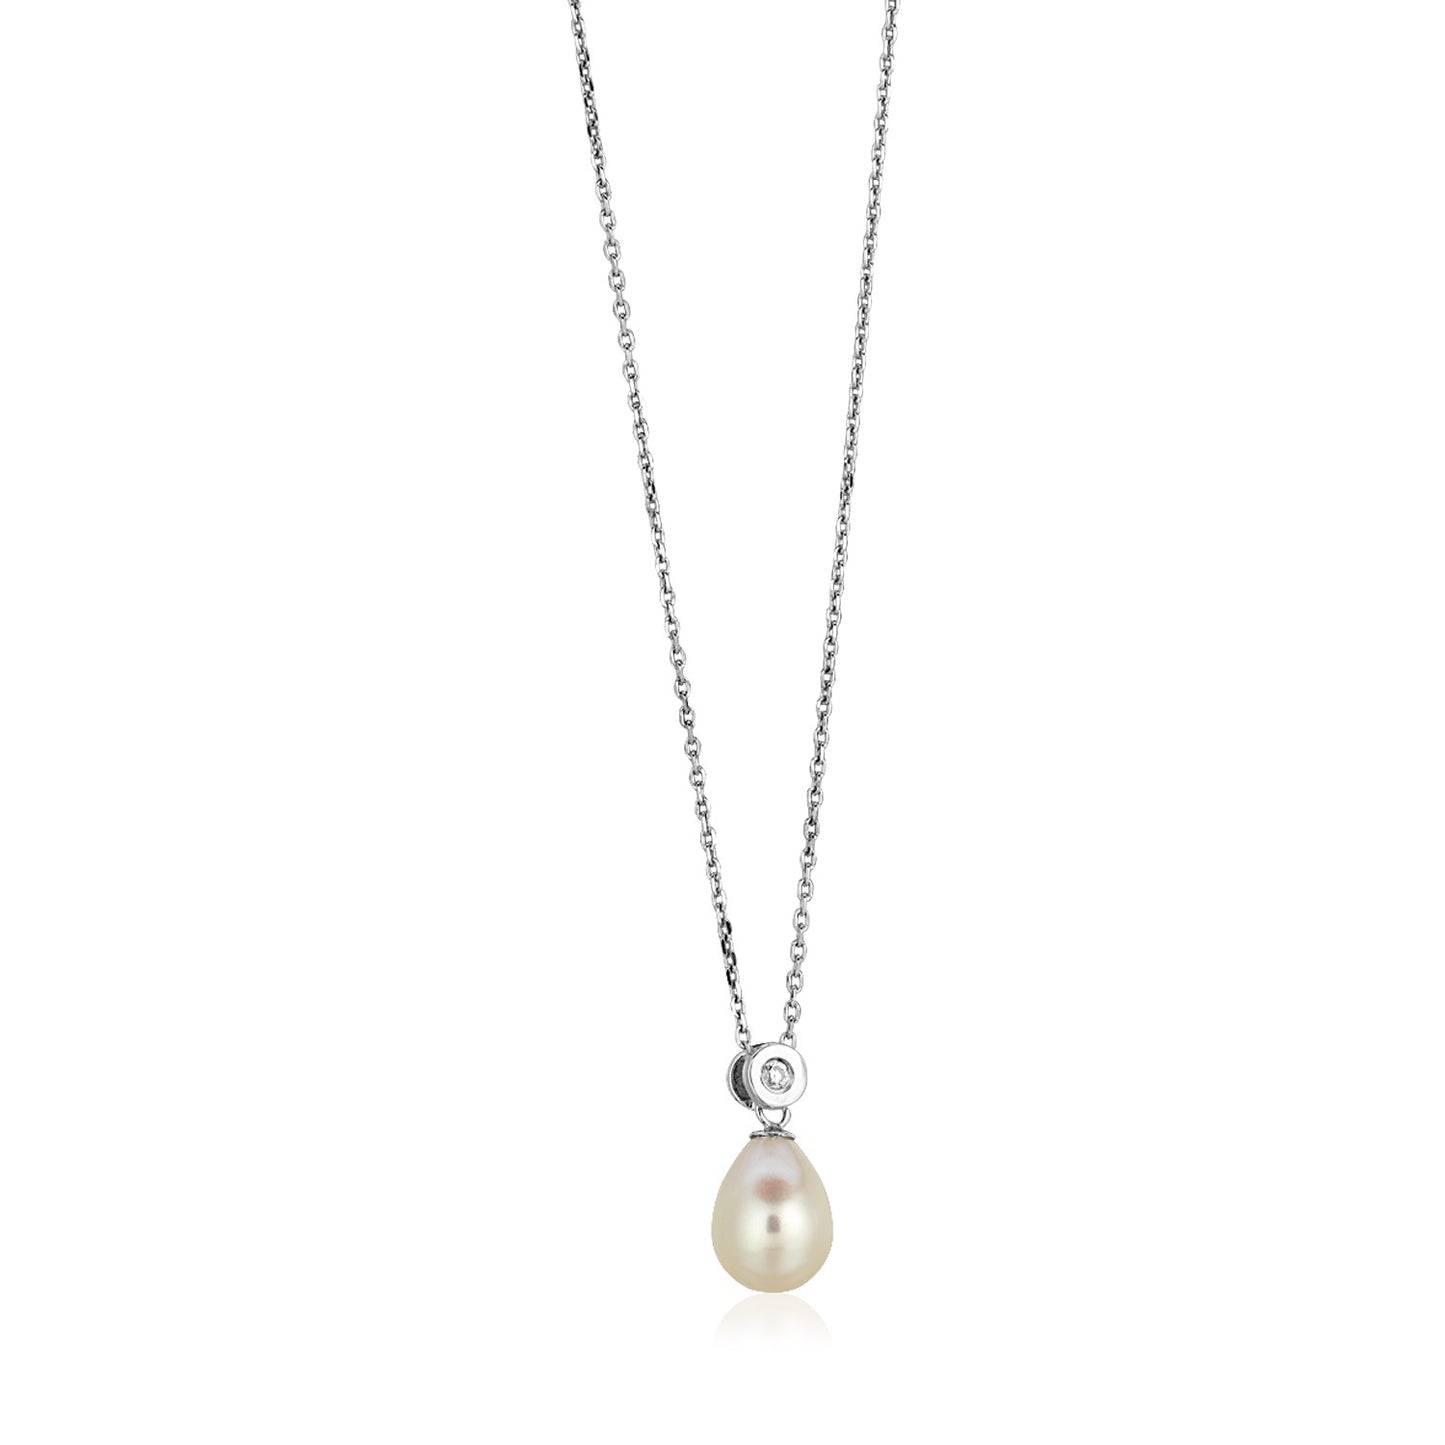 Sterling Silver Necklace with Pear Shaped Pearl and Cubic Zirconias